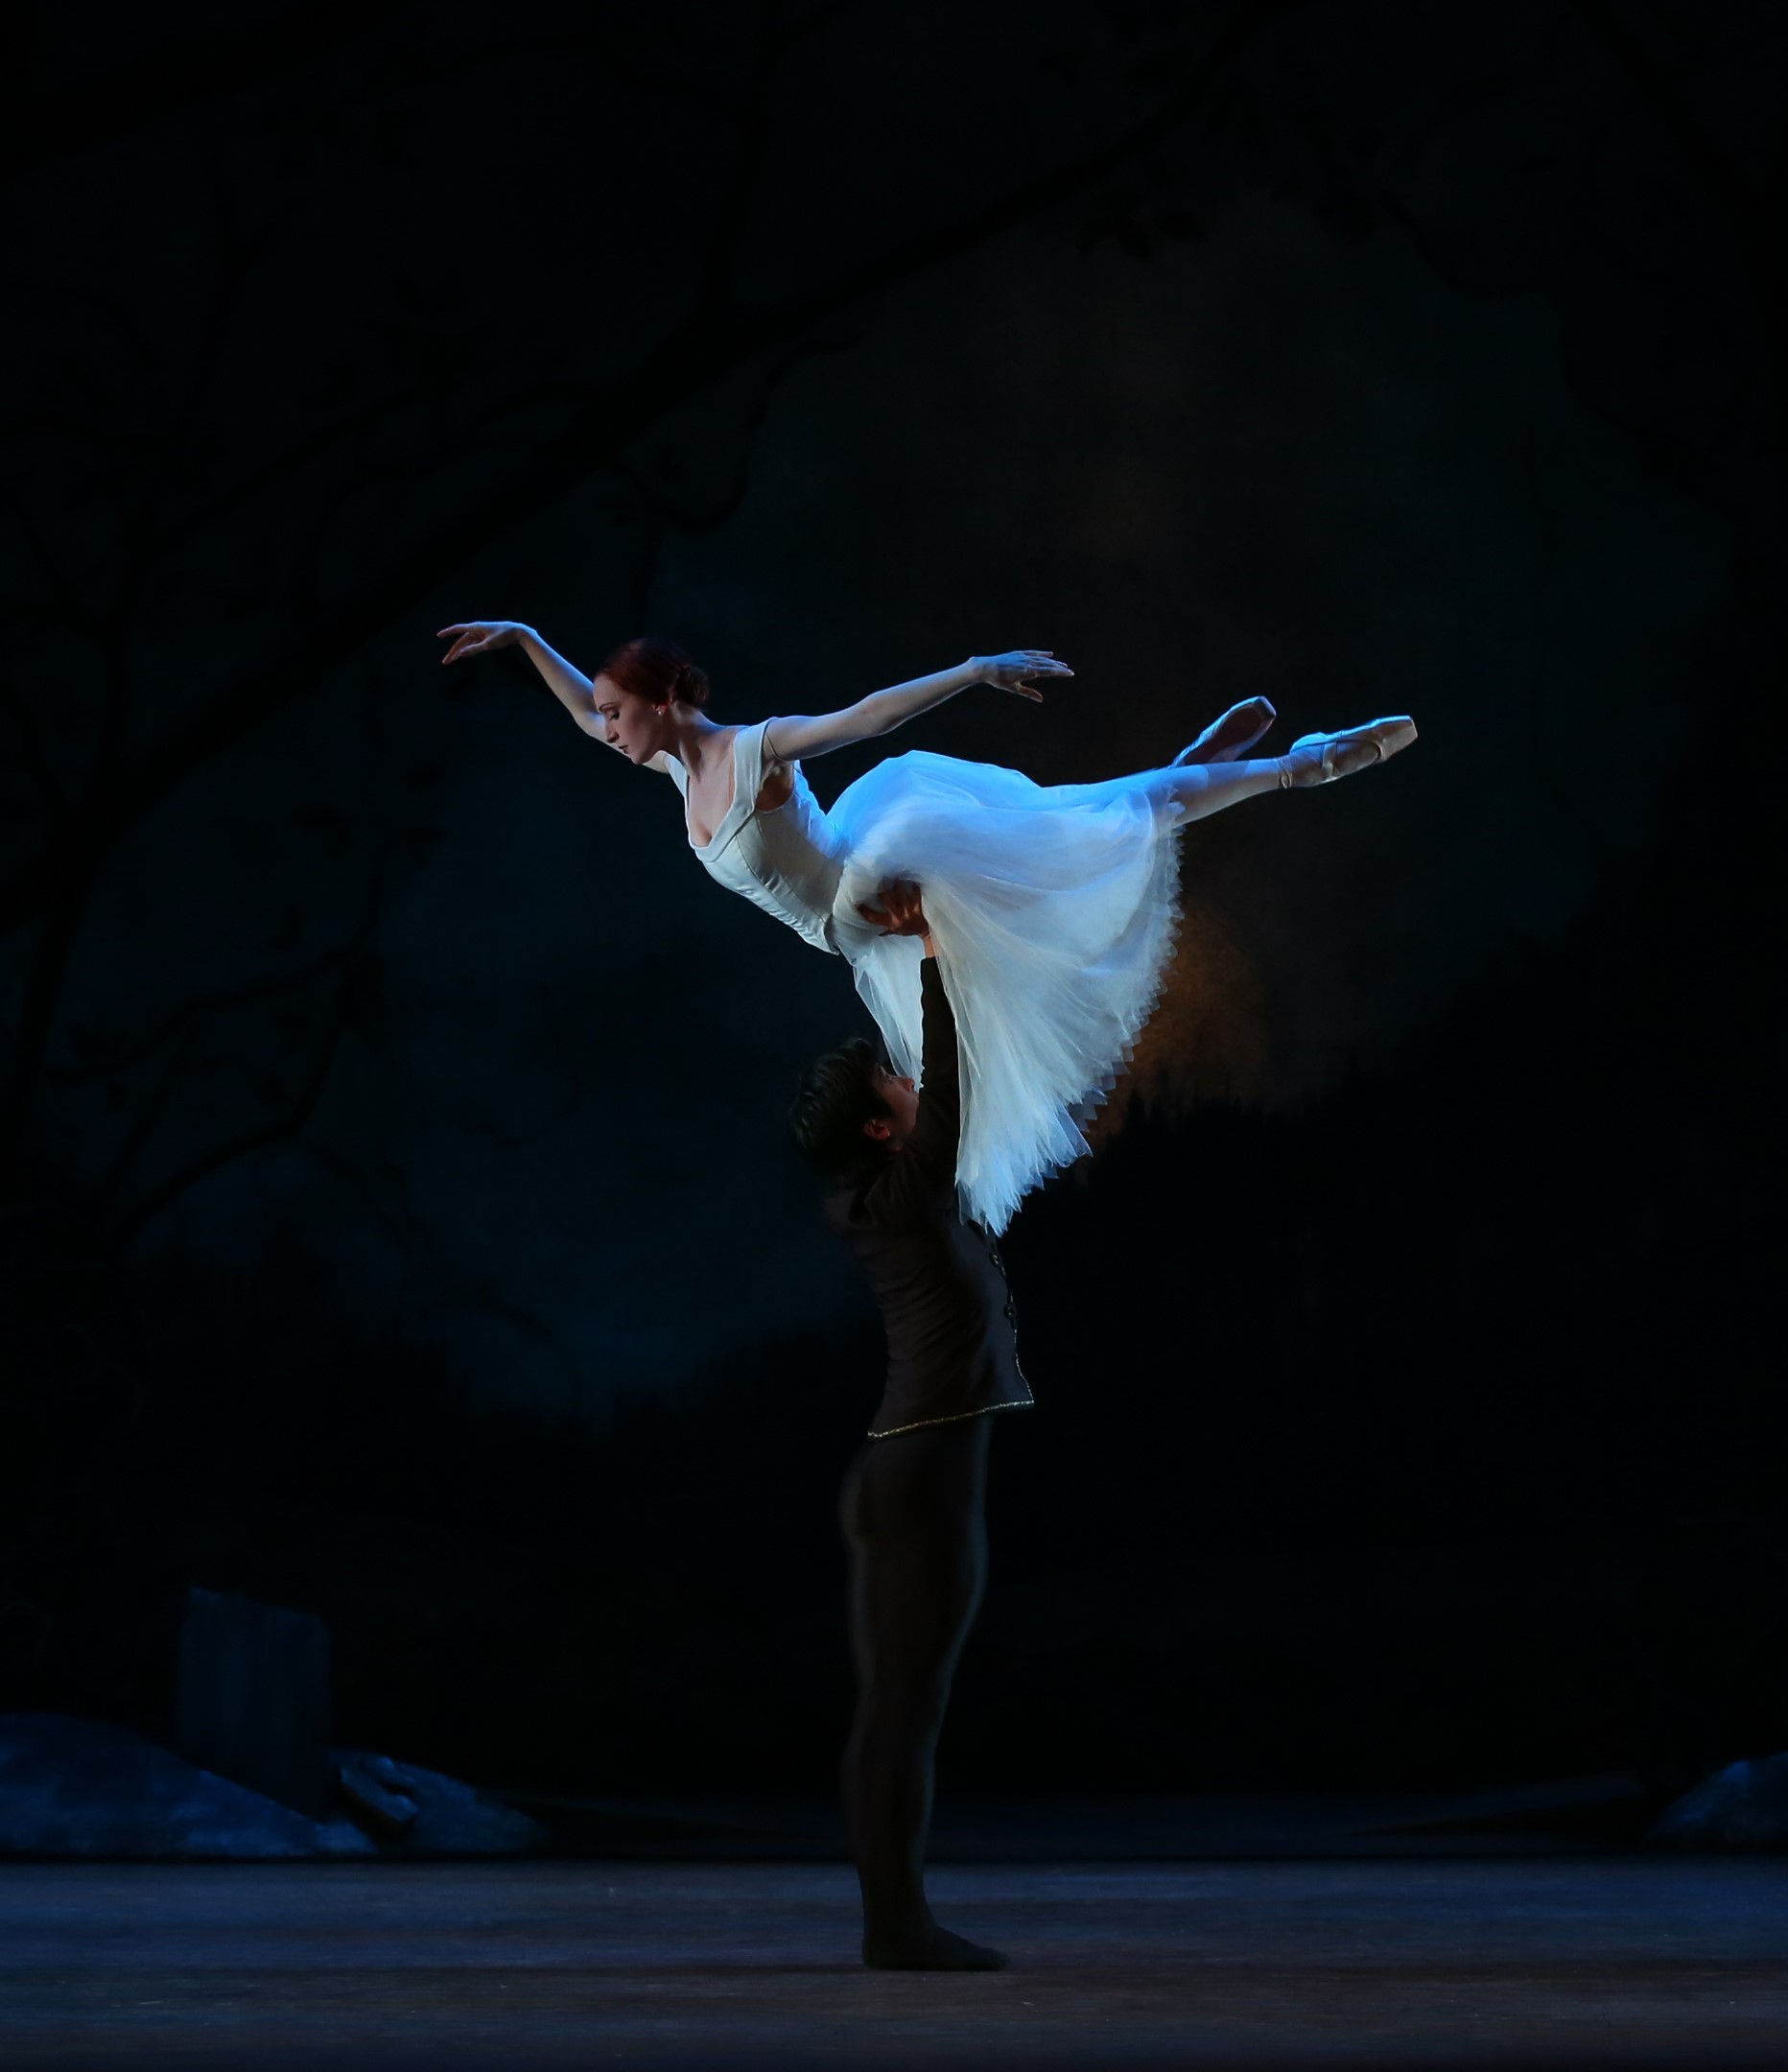 Dancer in white dress being lifted with dramatic lighting.